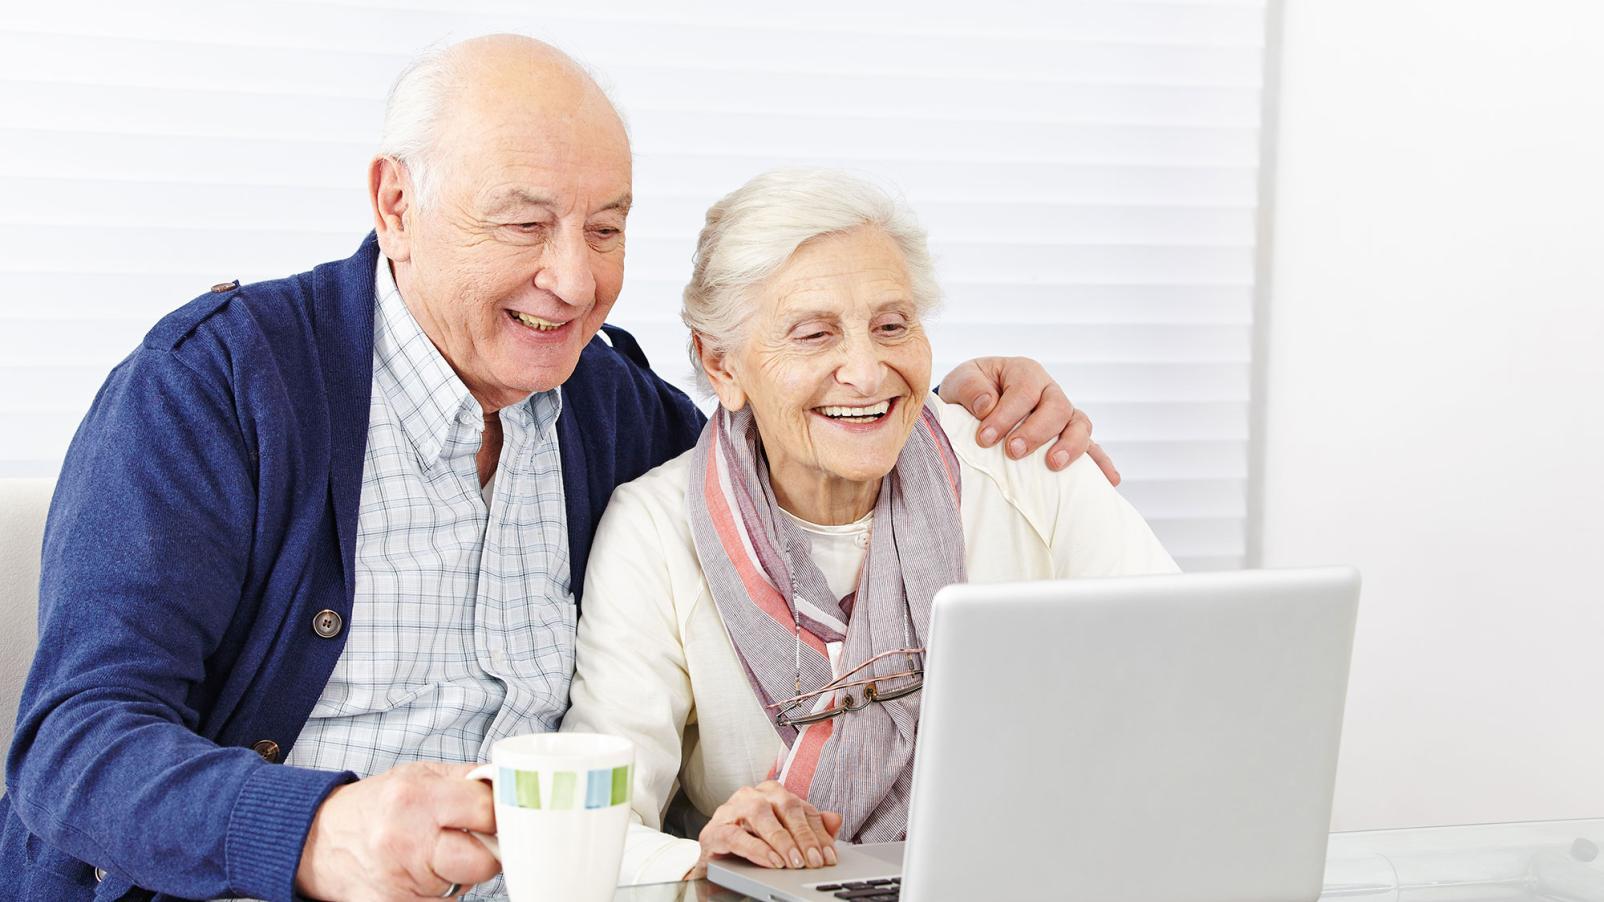 A couple smiling and looking at a laptop on their table. Man has his arm around her.